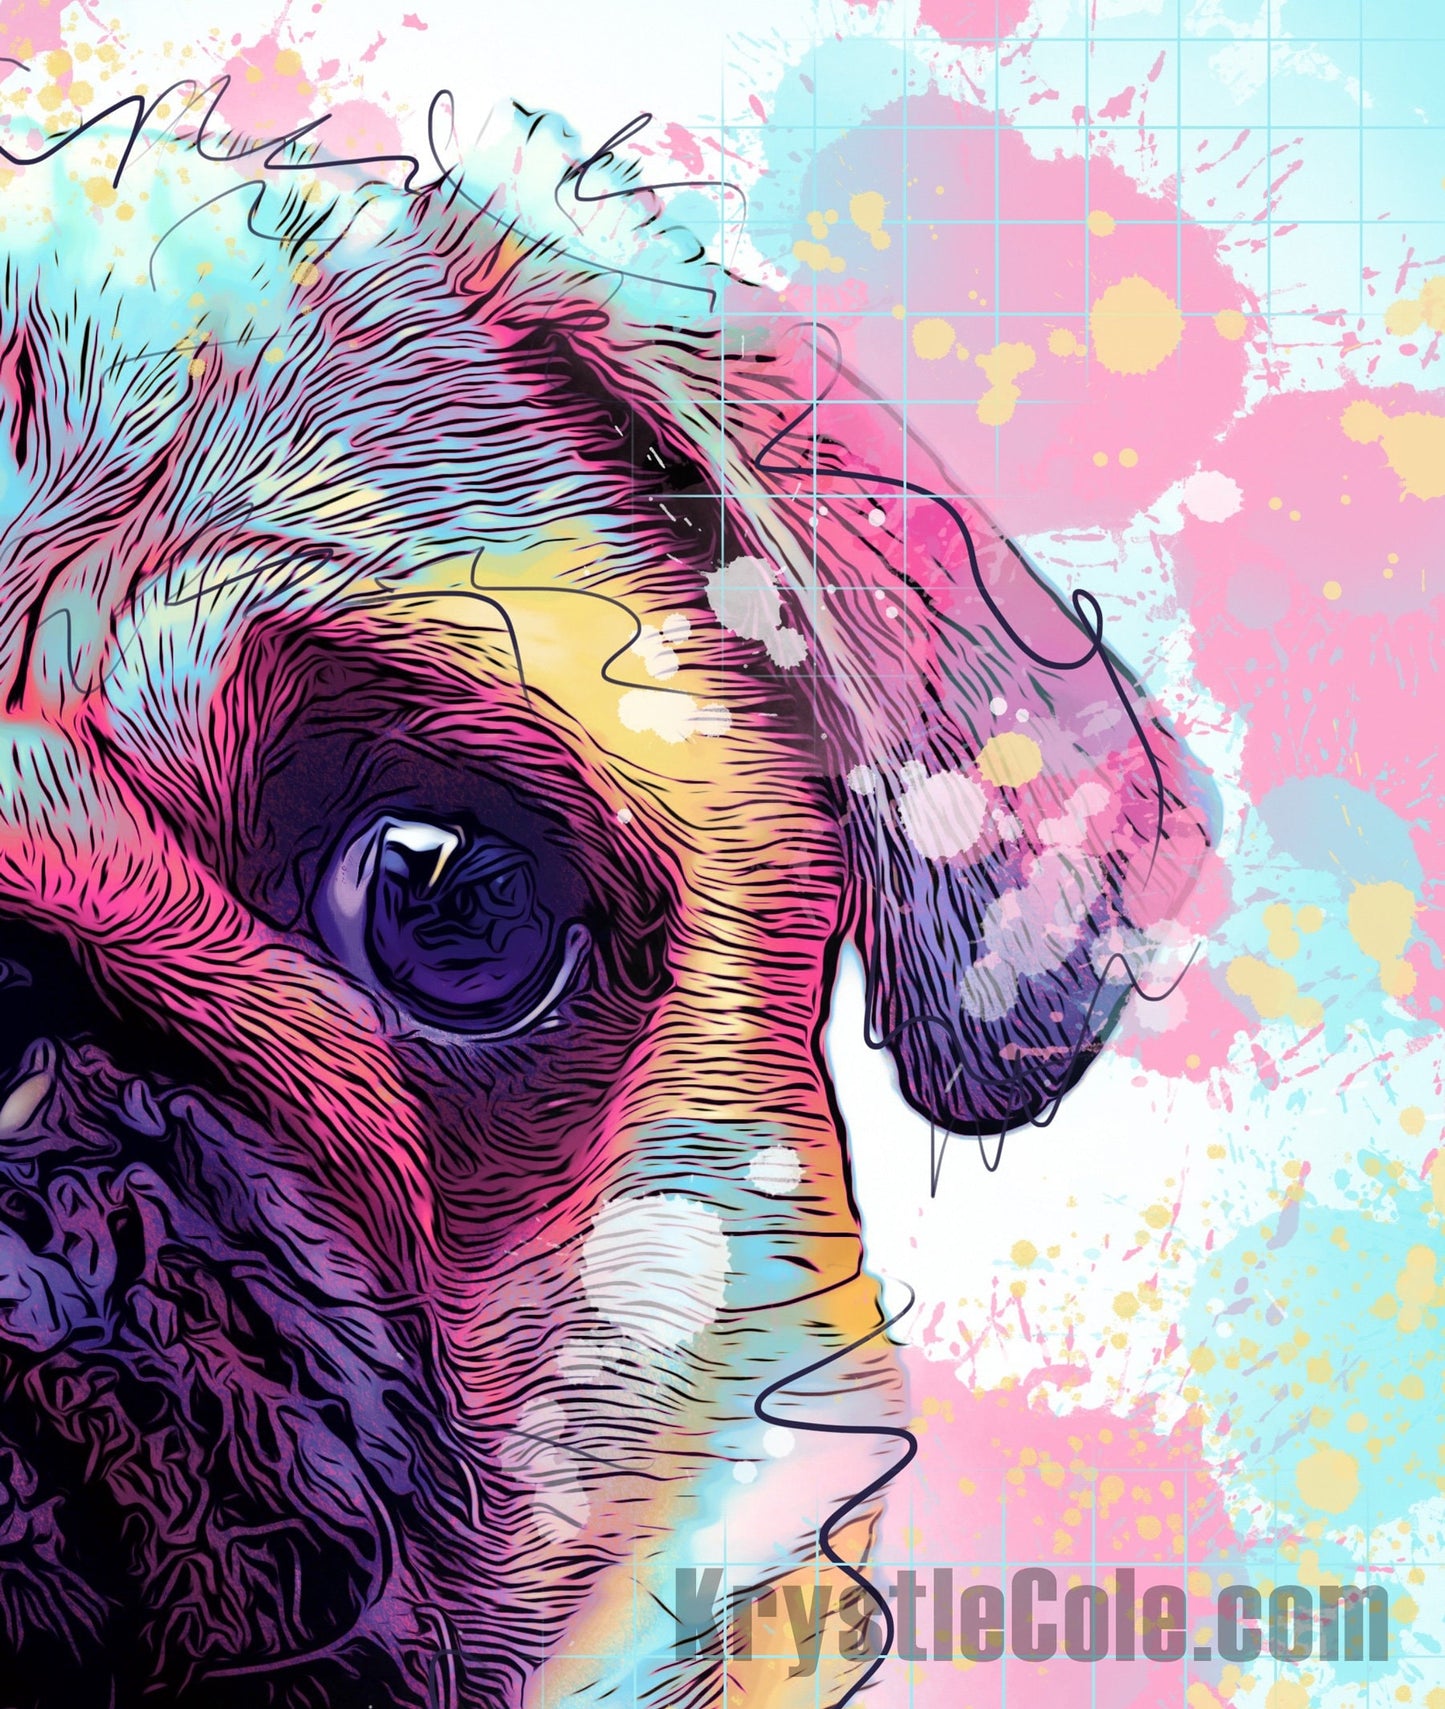 Pug Art on CANVAS or PAPER - Pug Print. Pug Gifts. Pug Wall Decor. Original Artwork by Krystle Cole *Each Print Hand Signed*